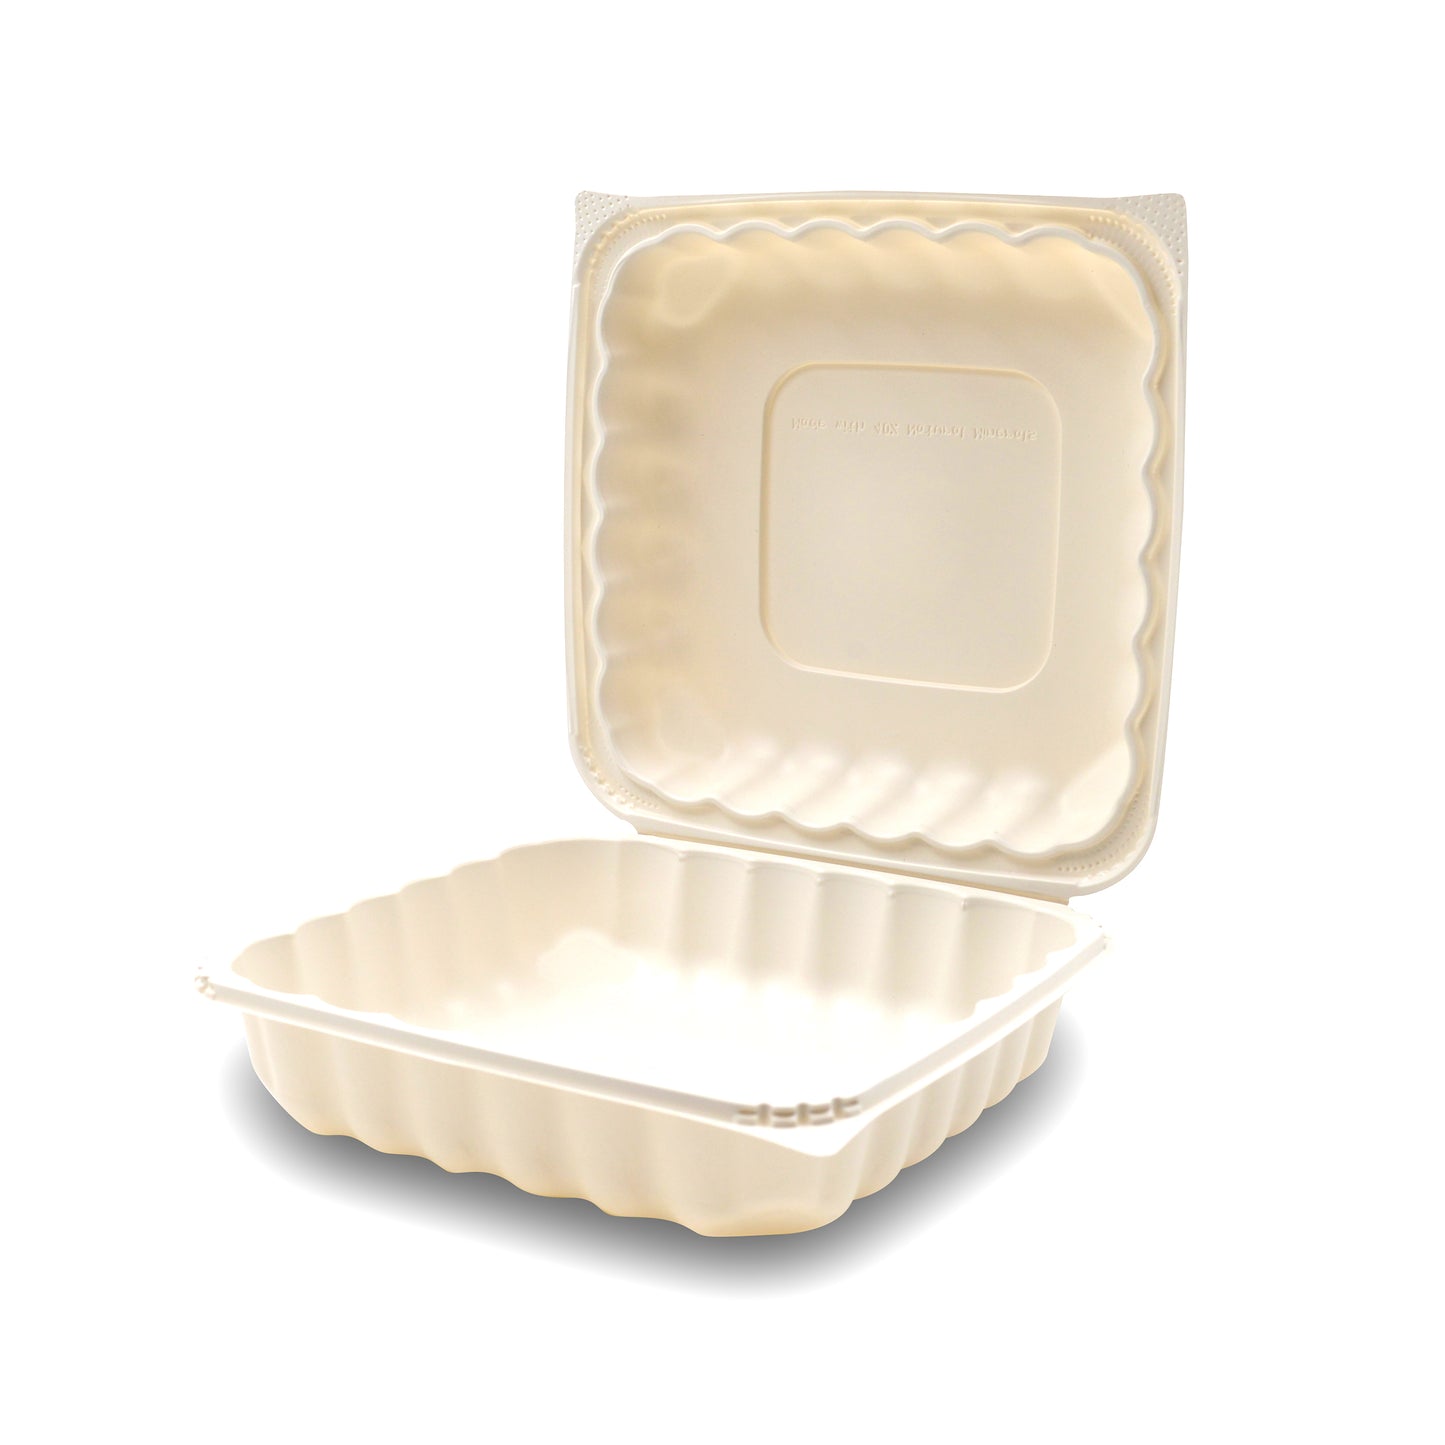 360-001-881 EarthPro Hinged MFPP 8x8 carry-out tray, single compartment